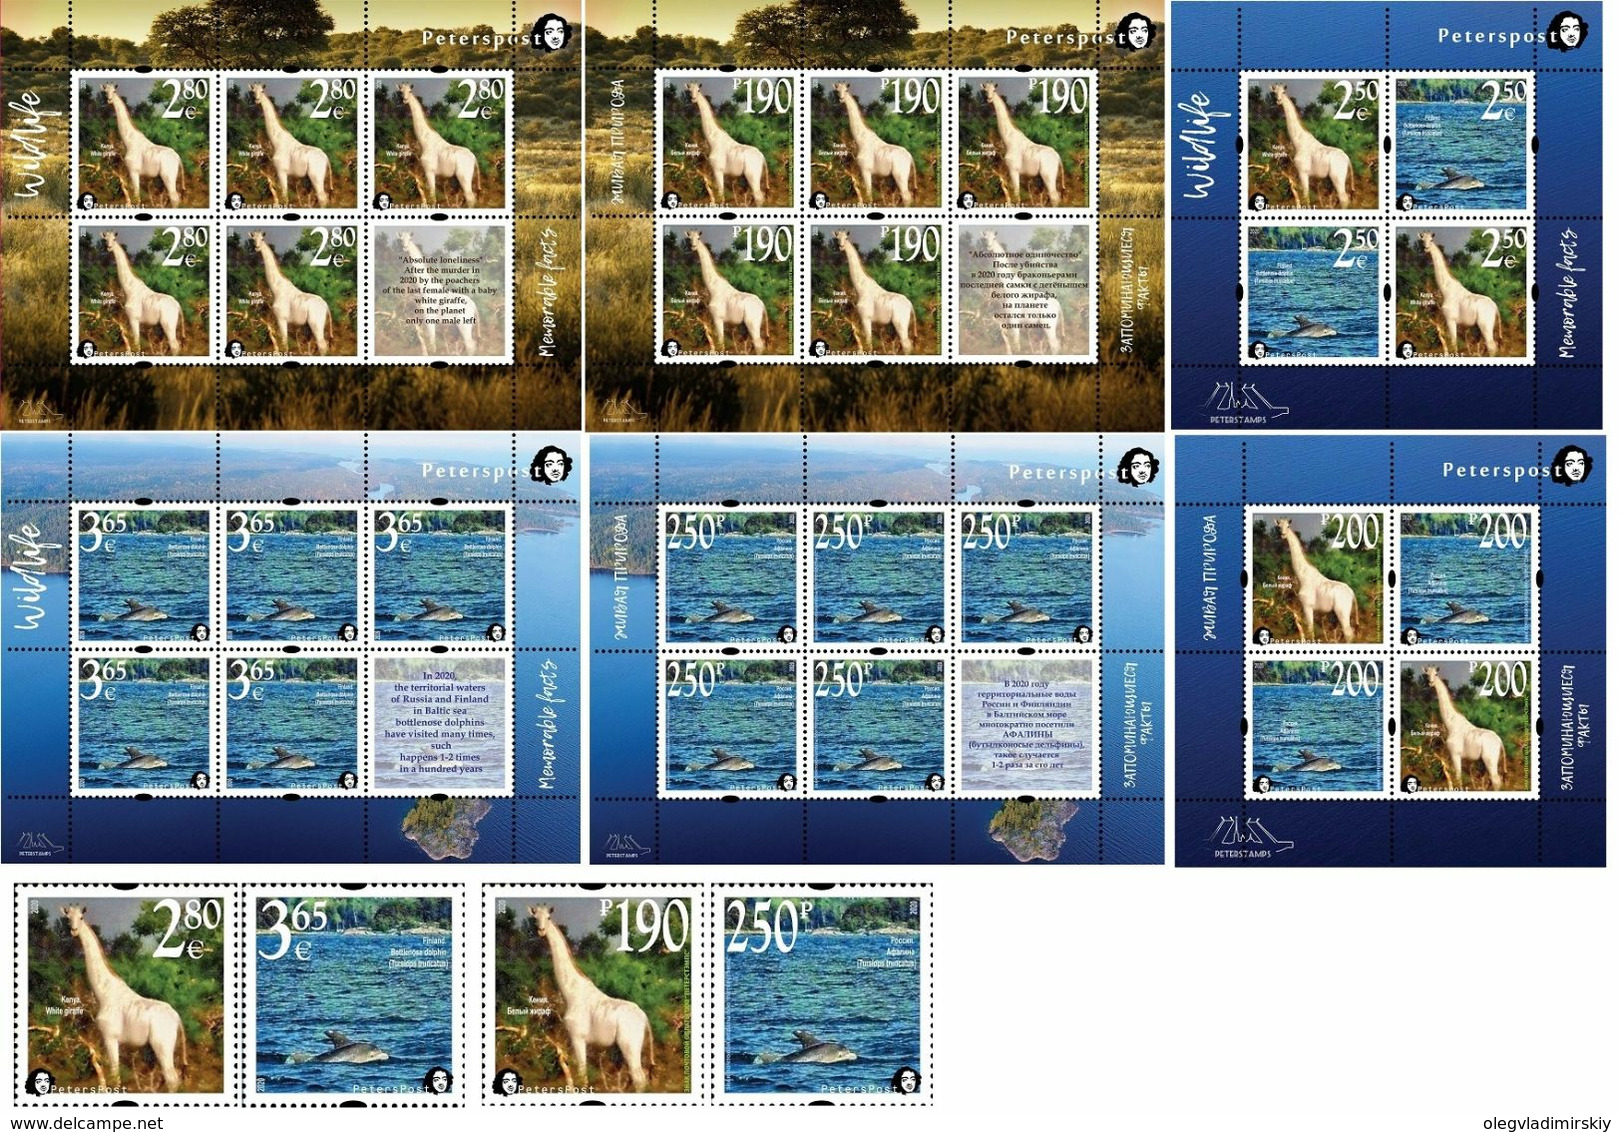 Russia. Peterspost.Wild Life."Memorable Facts", White Giraffe And Bottlenose Dolphin, 2020, Full Issue Set - Neufs